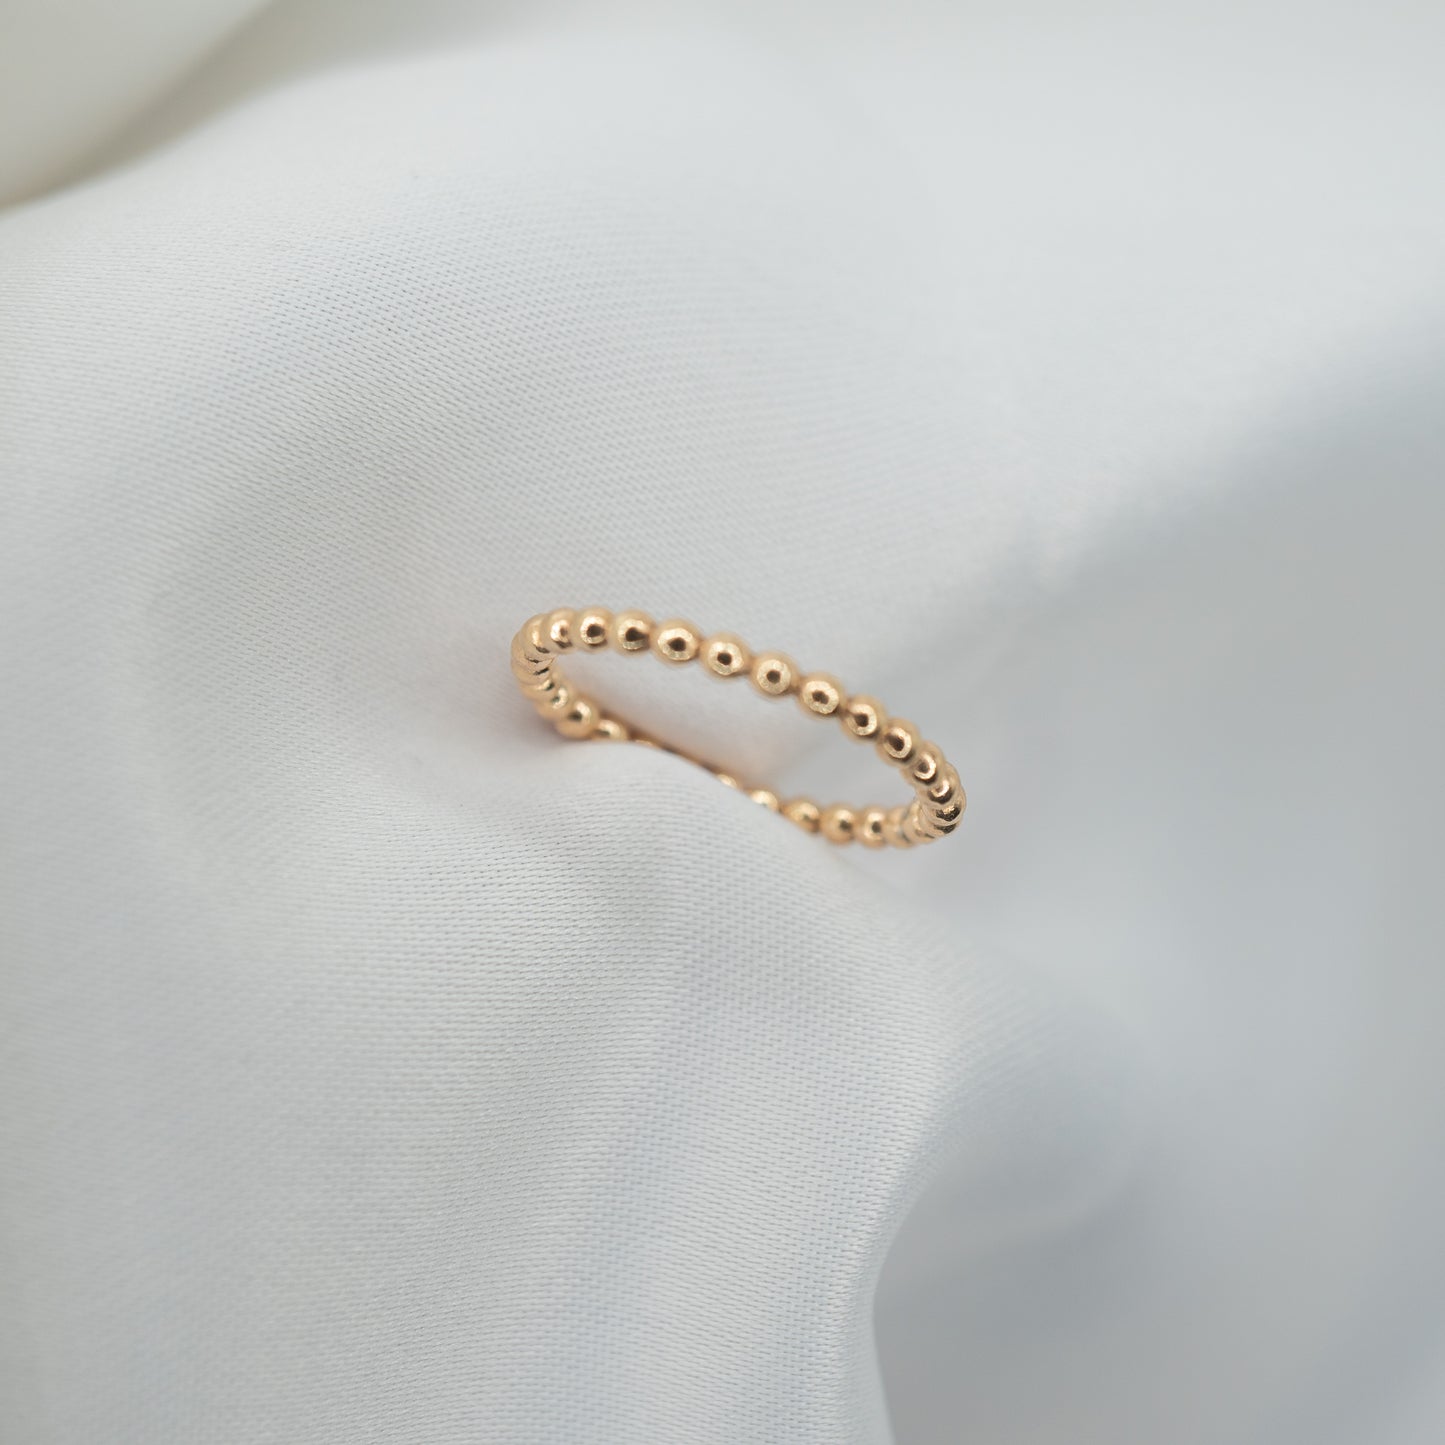 Gold Filled Beaded Ring - shot on white - front